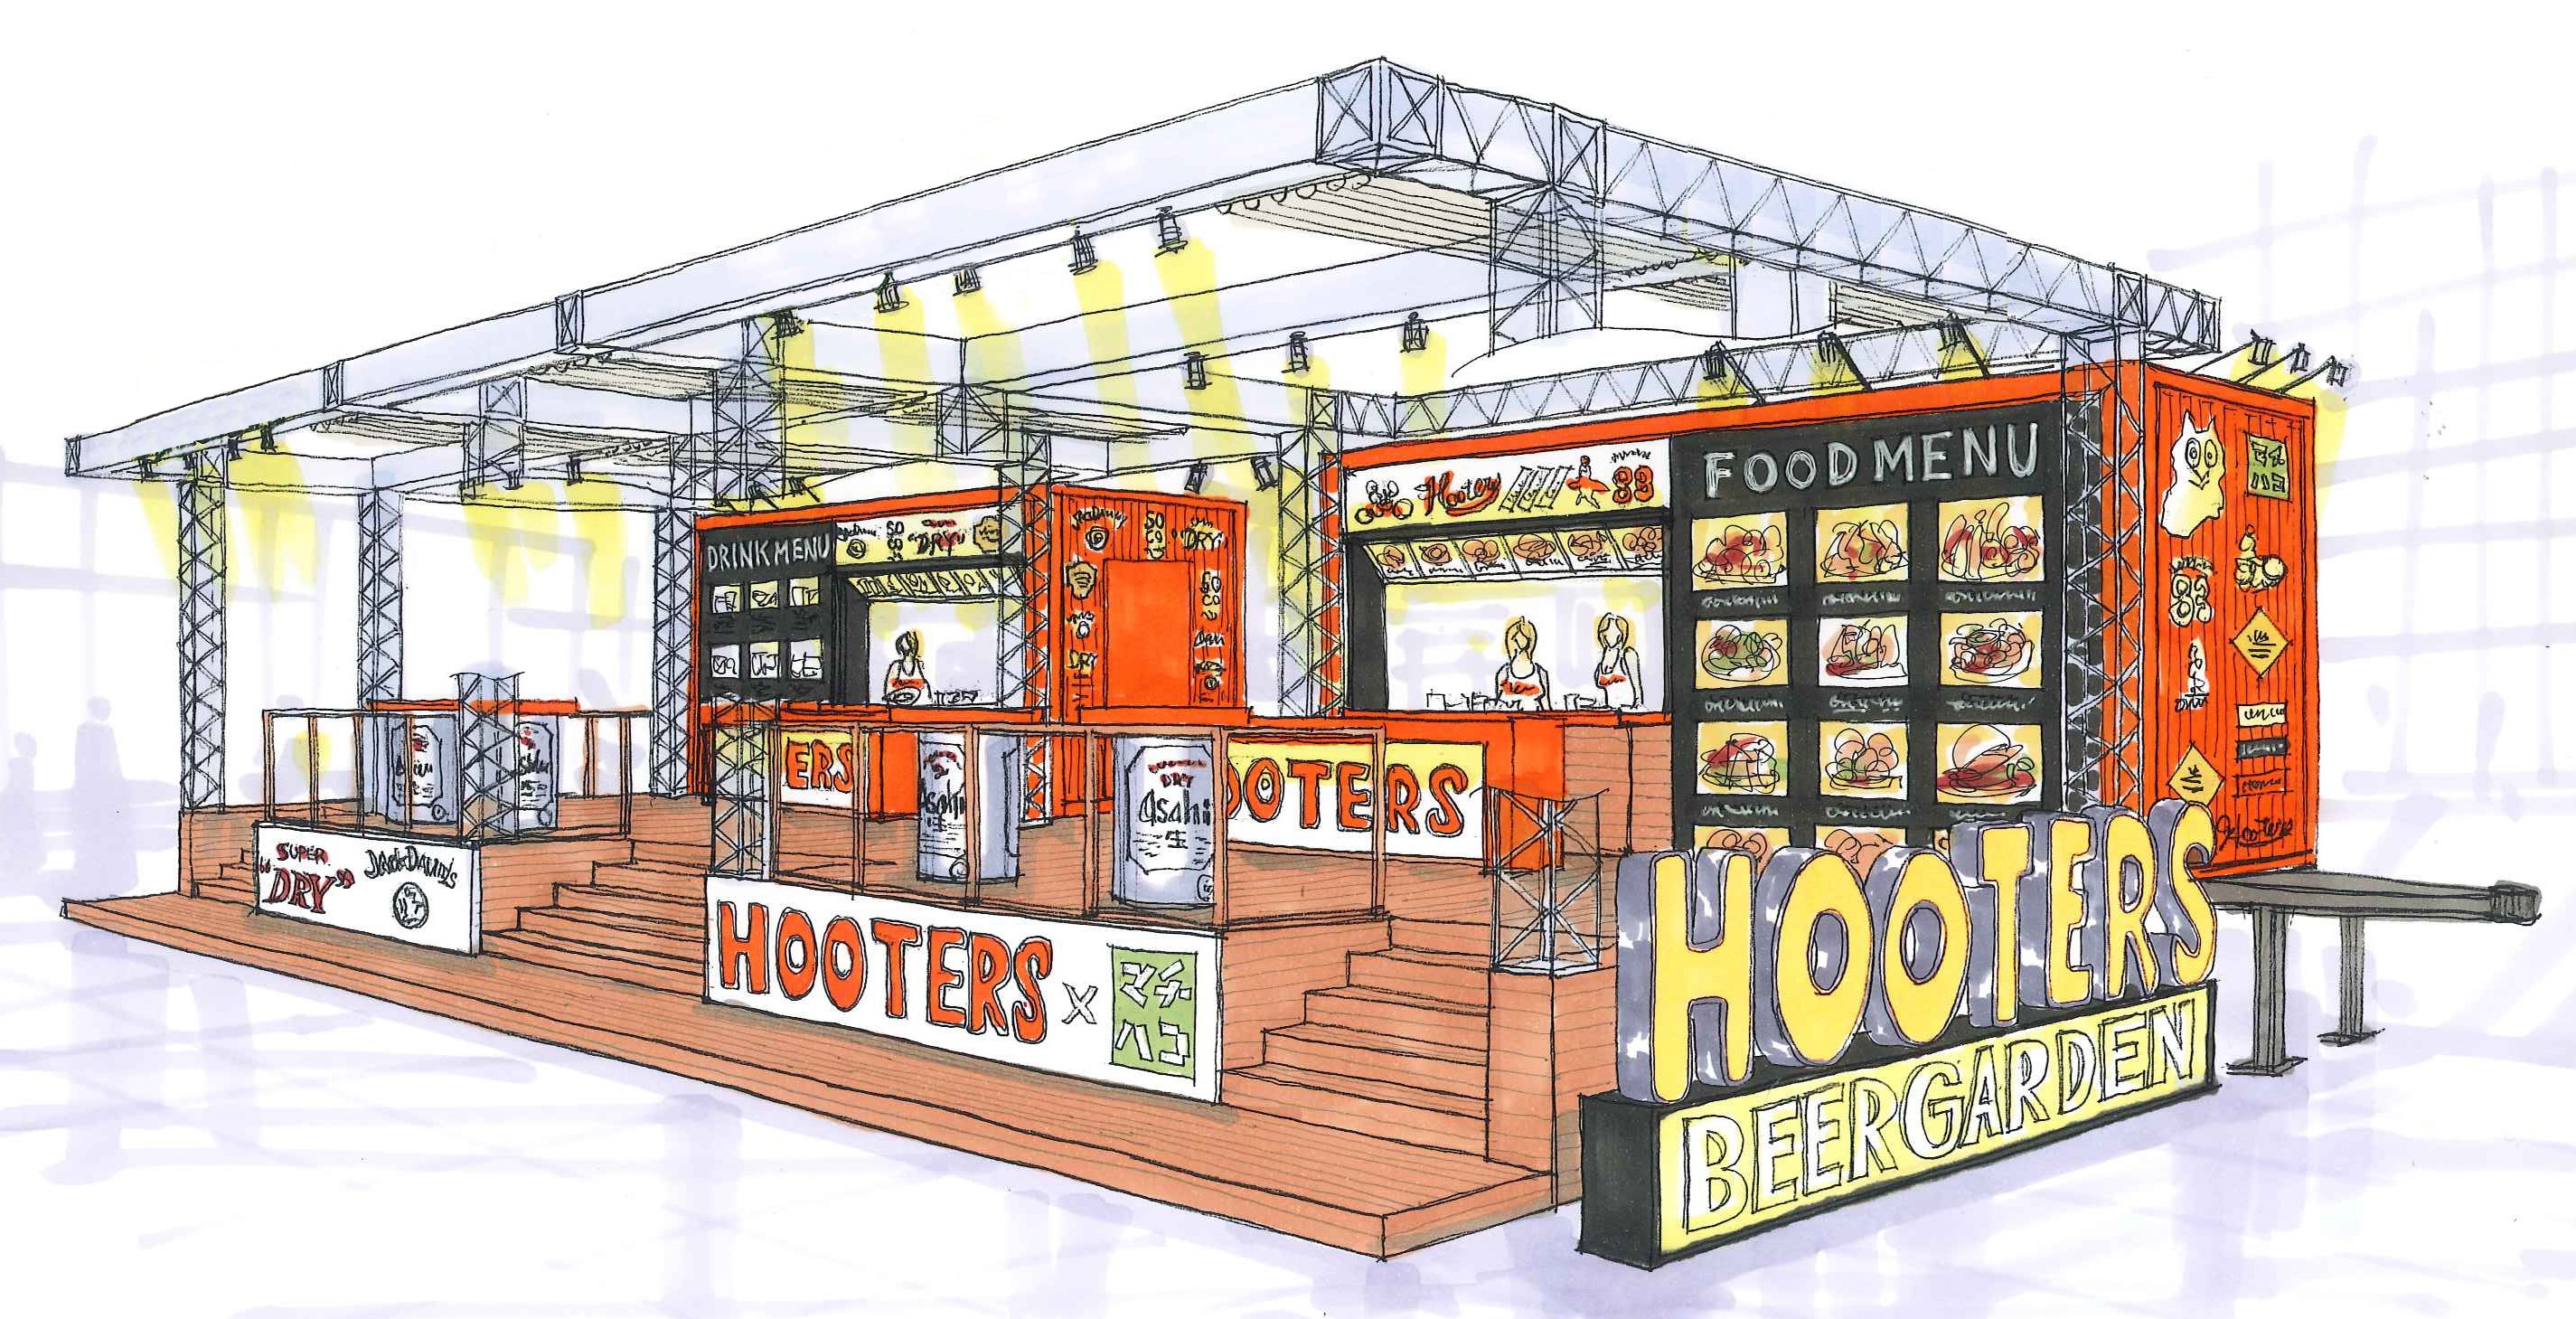 HOOTERS ビアガーデン大手町